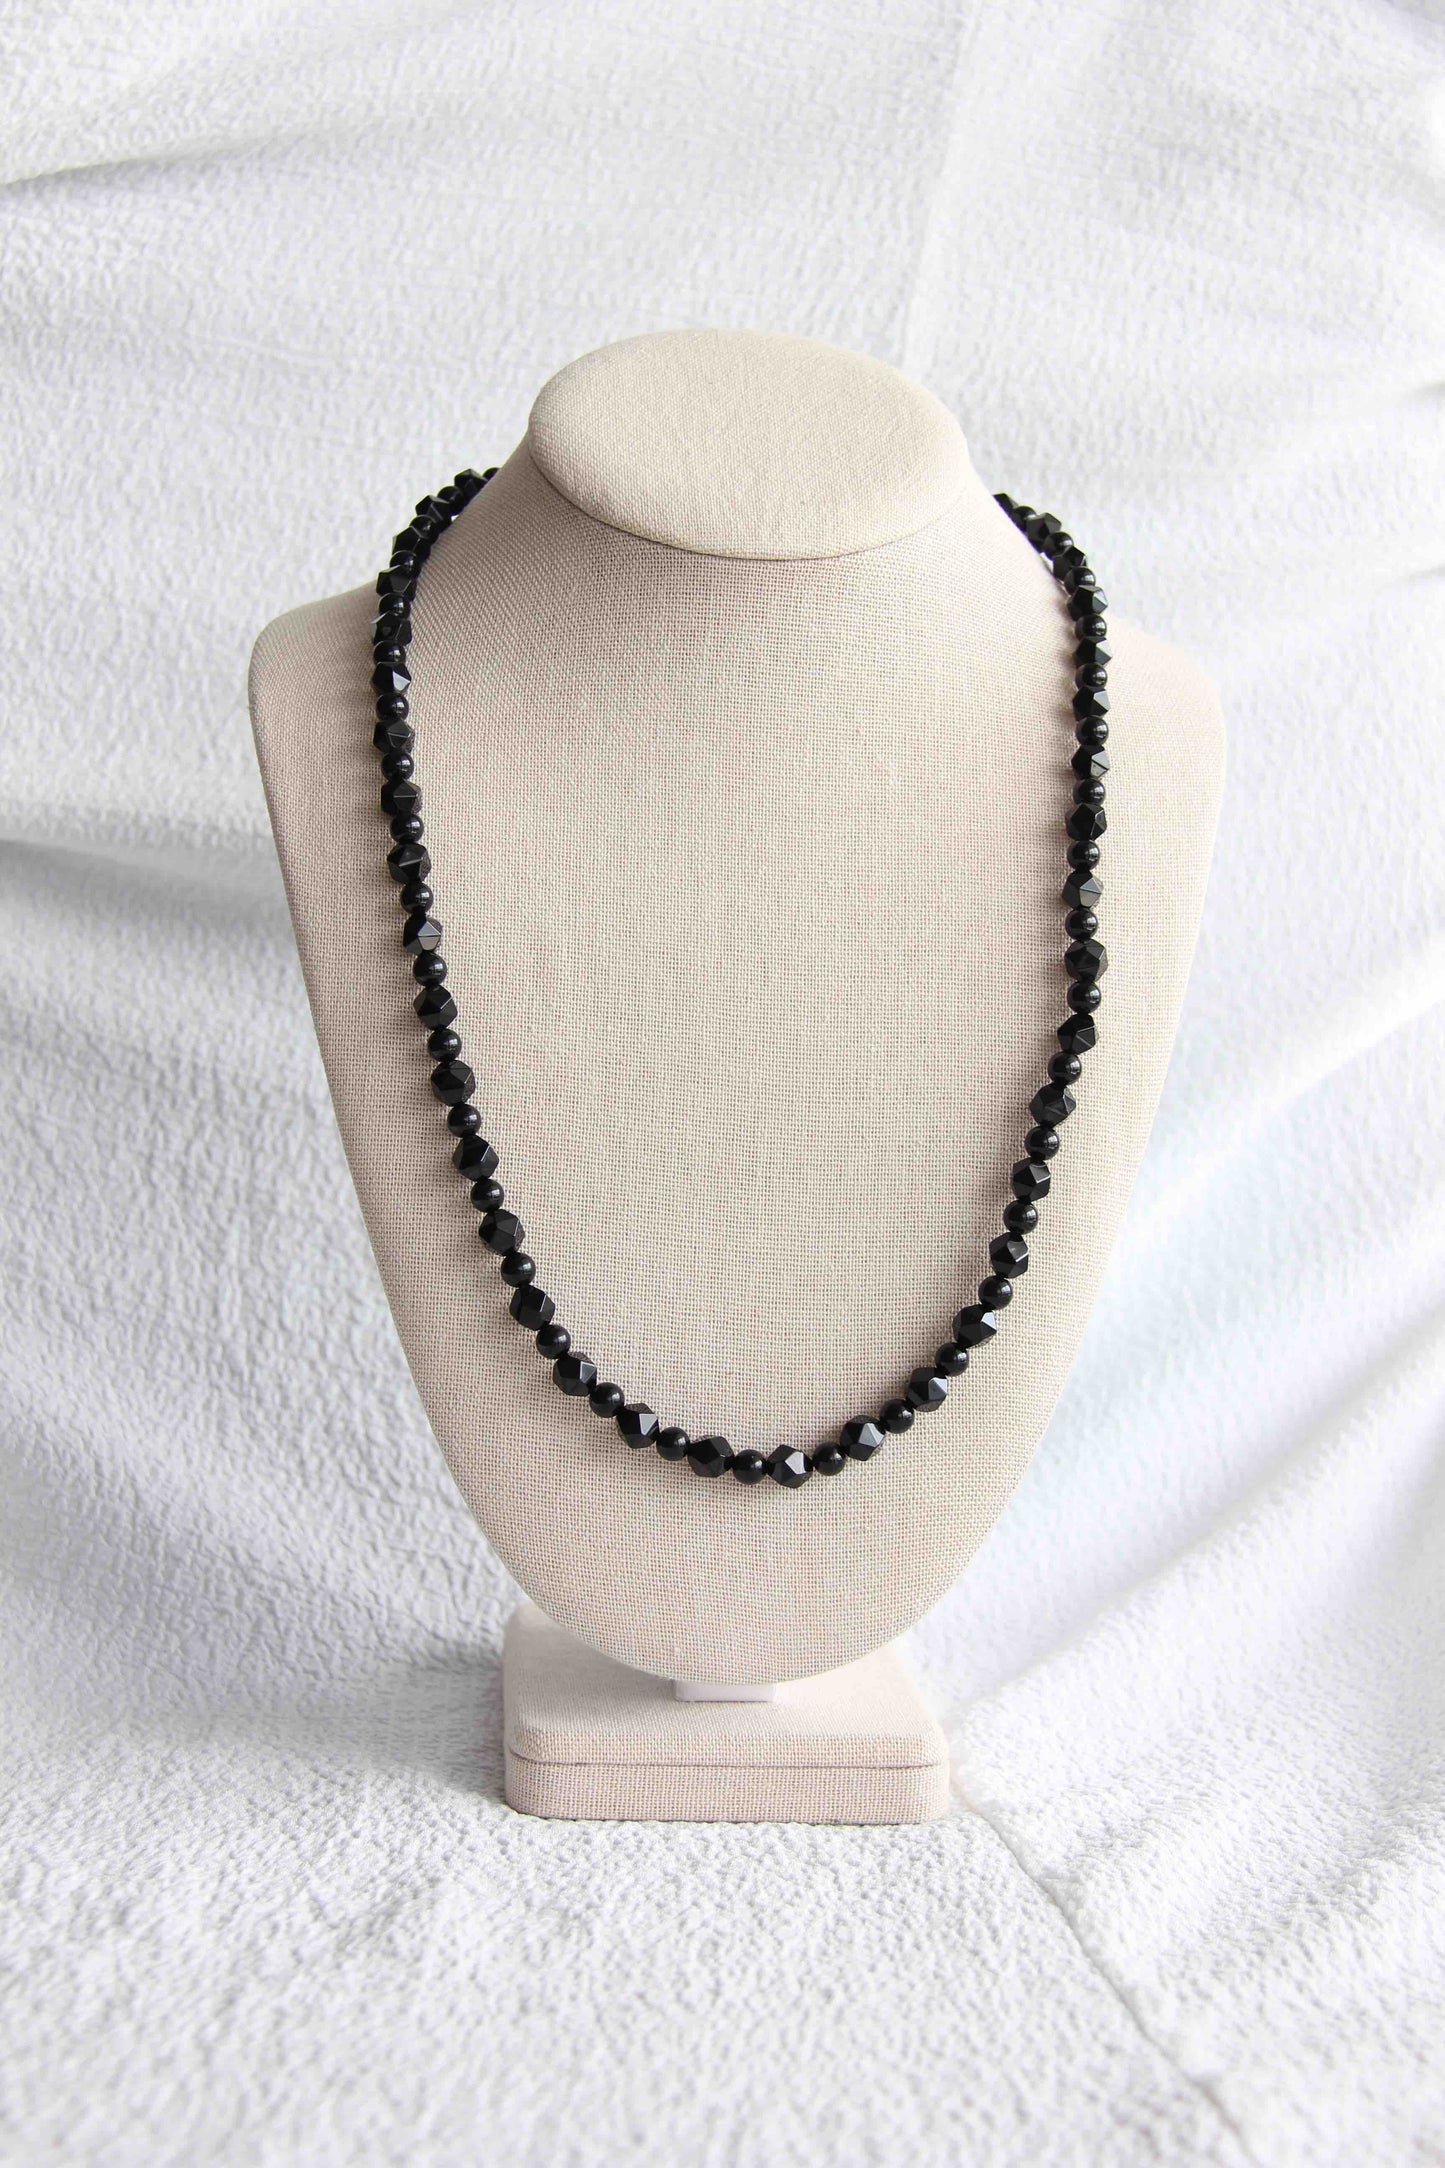 Star Cut Faceted and round onyx beaded handmade gemstone necklace with custom closure button that is made 14k gold plated on solid 925 sterling silver